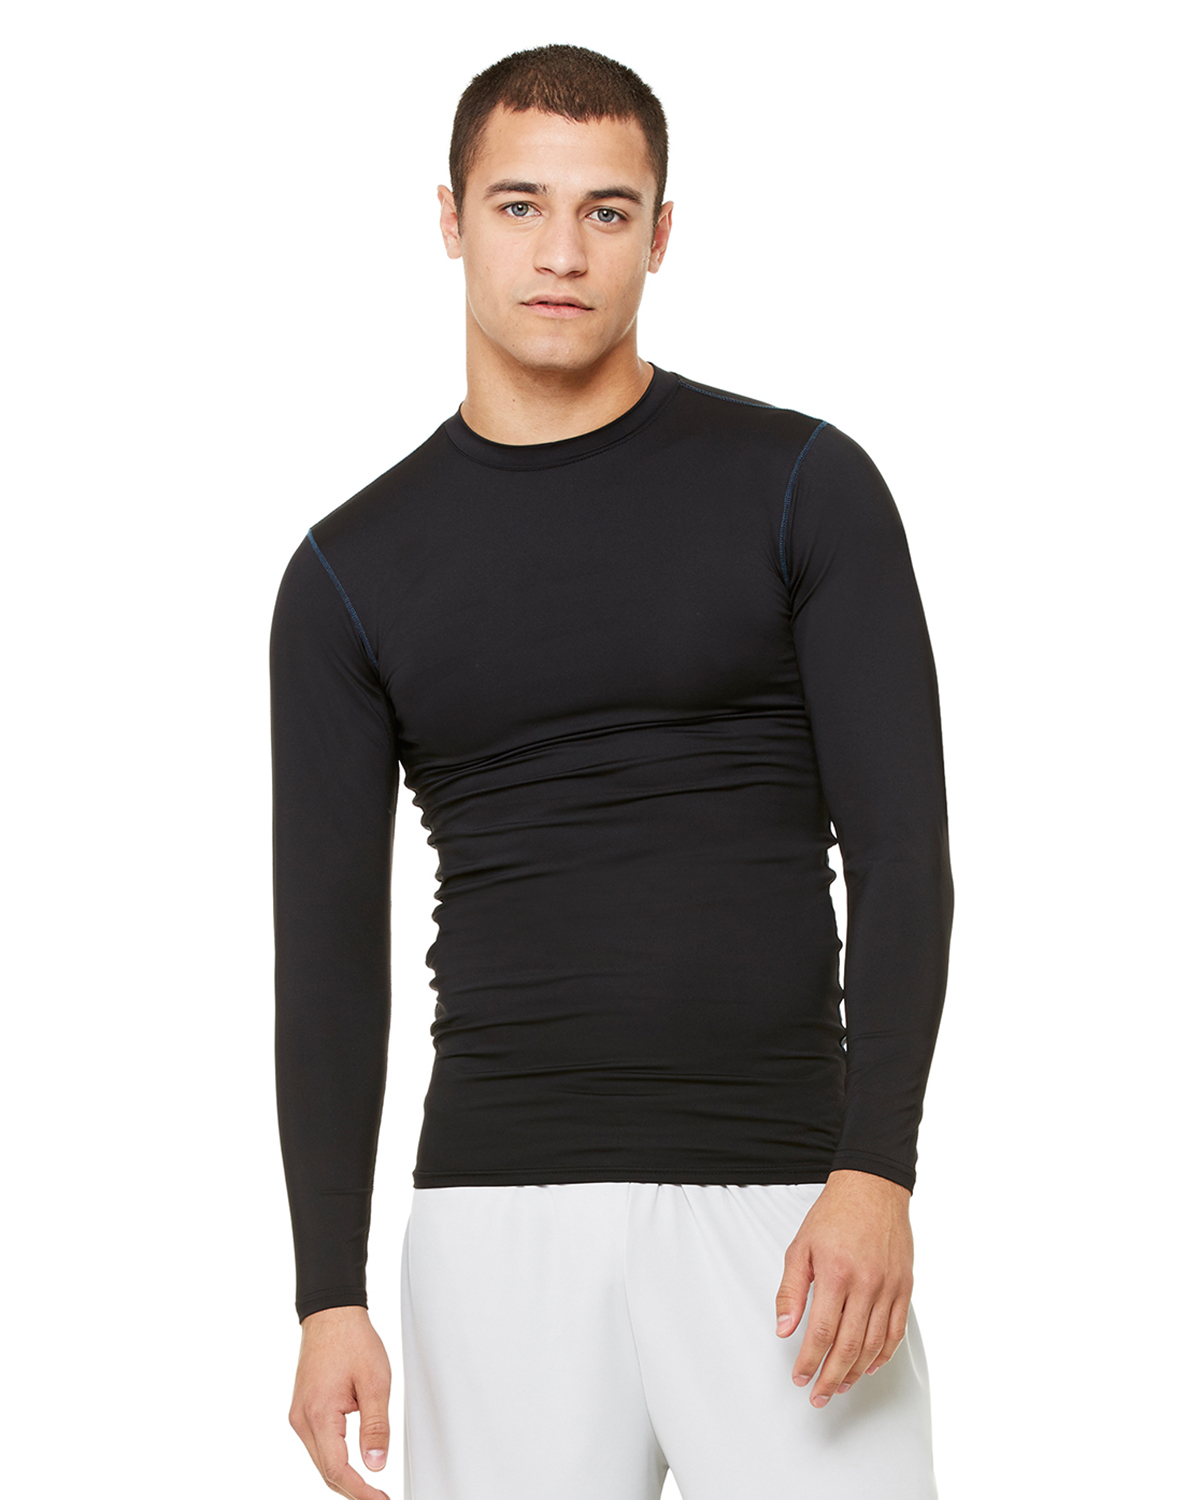 Men's Long Sleeve Compression Shirts Tight Sports Tops, 42% OFF